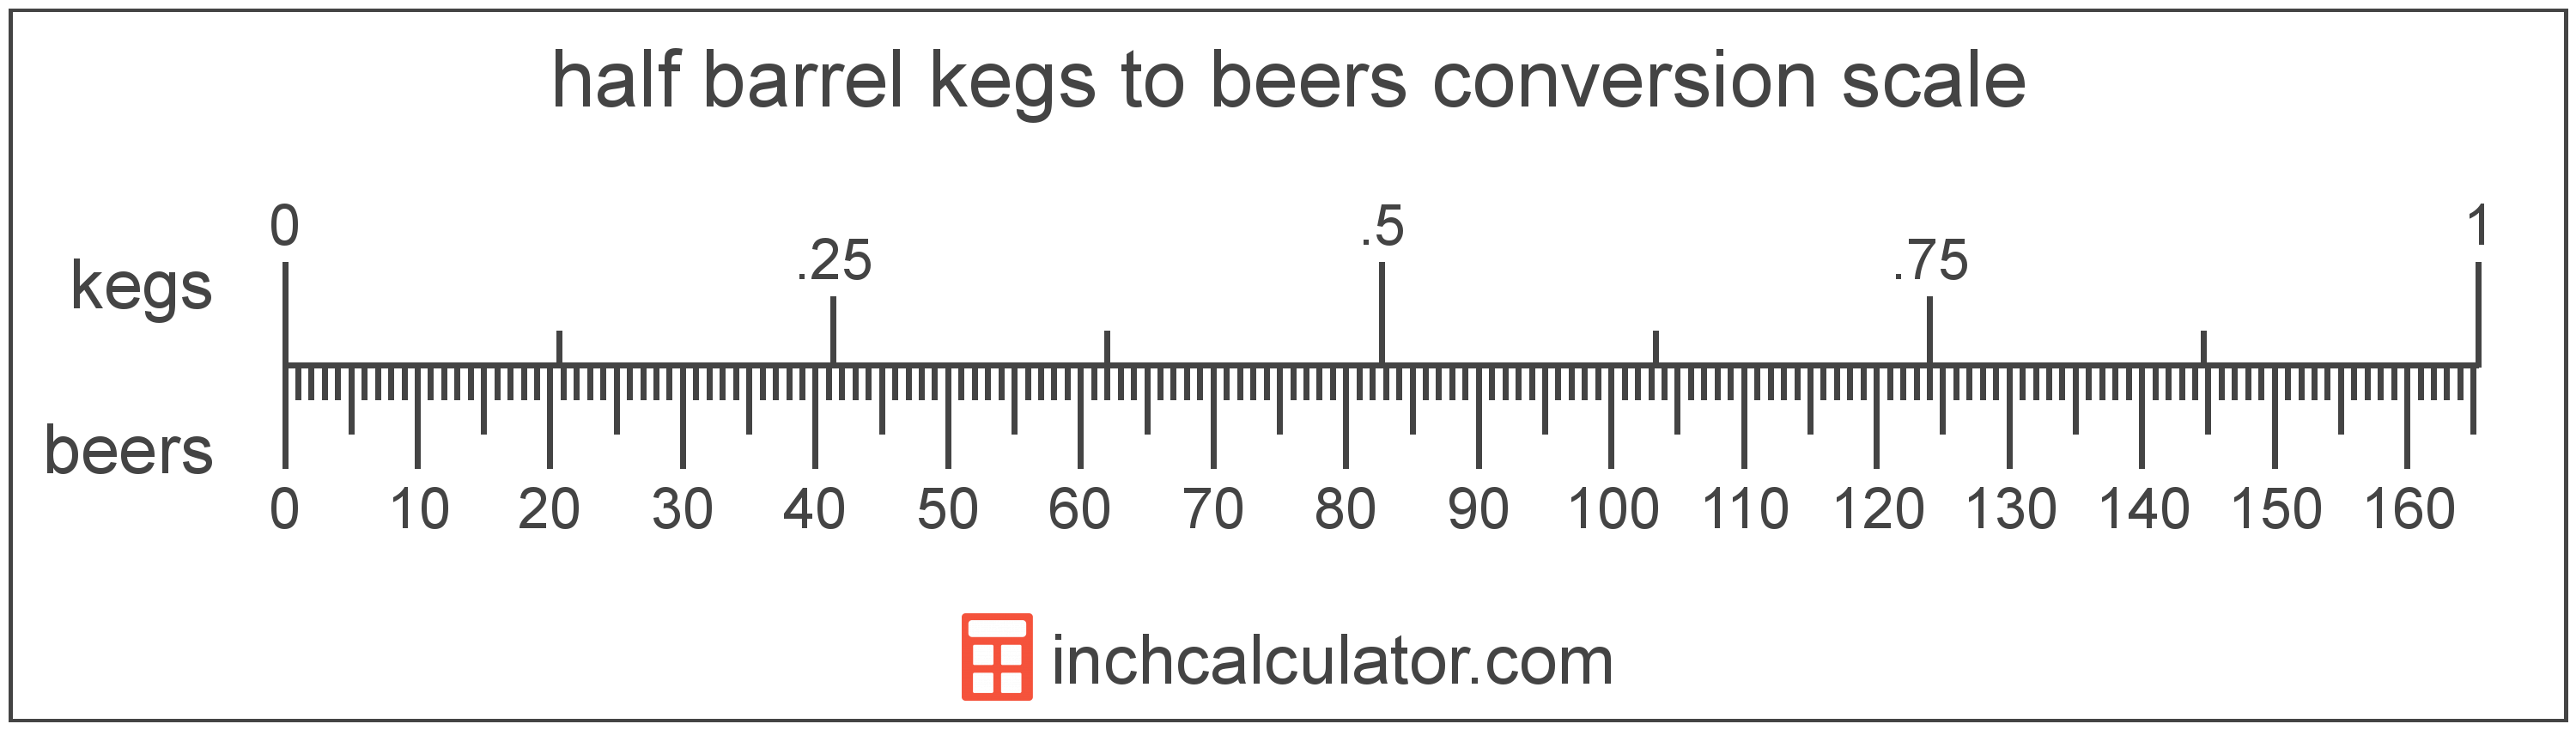 conversion scale showing half barrel kegs and equivalent beers beer volume values